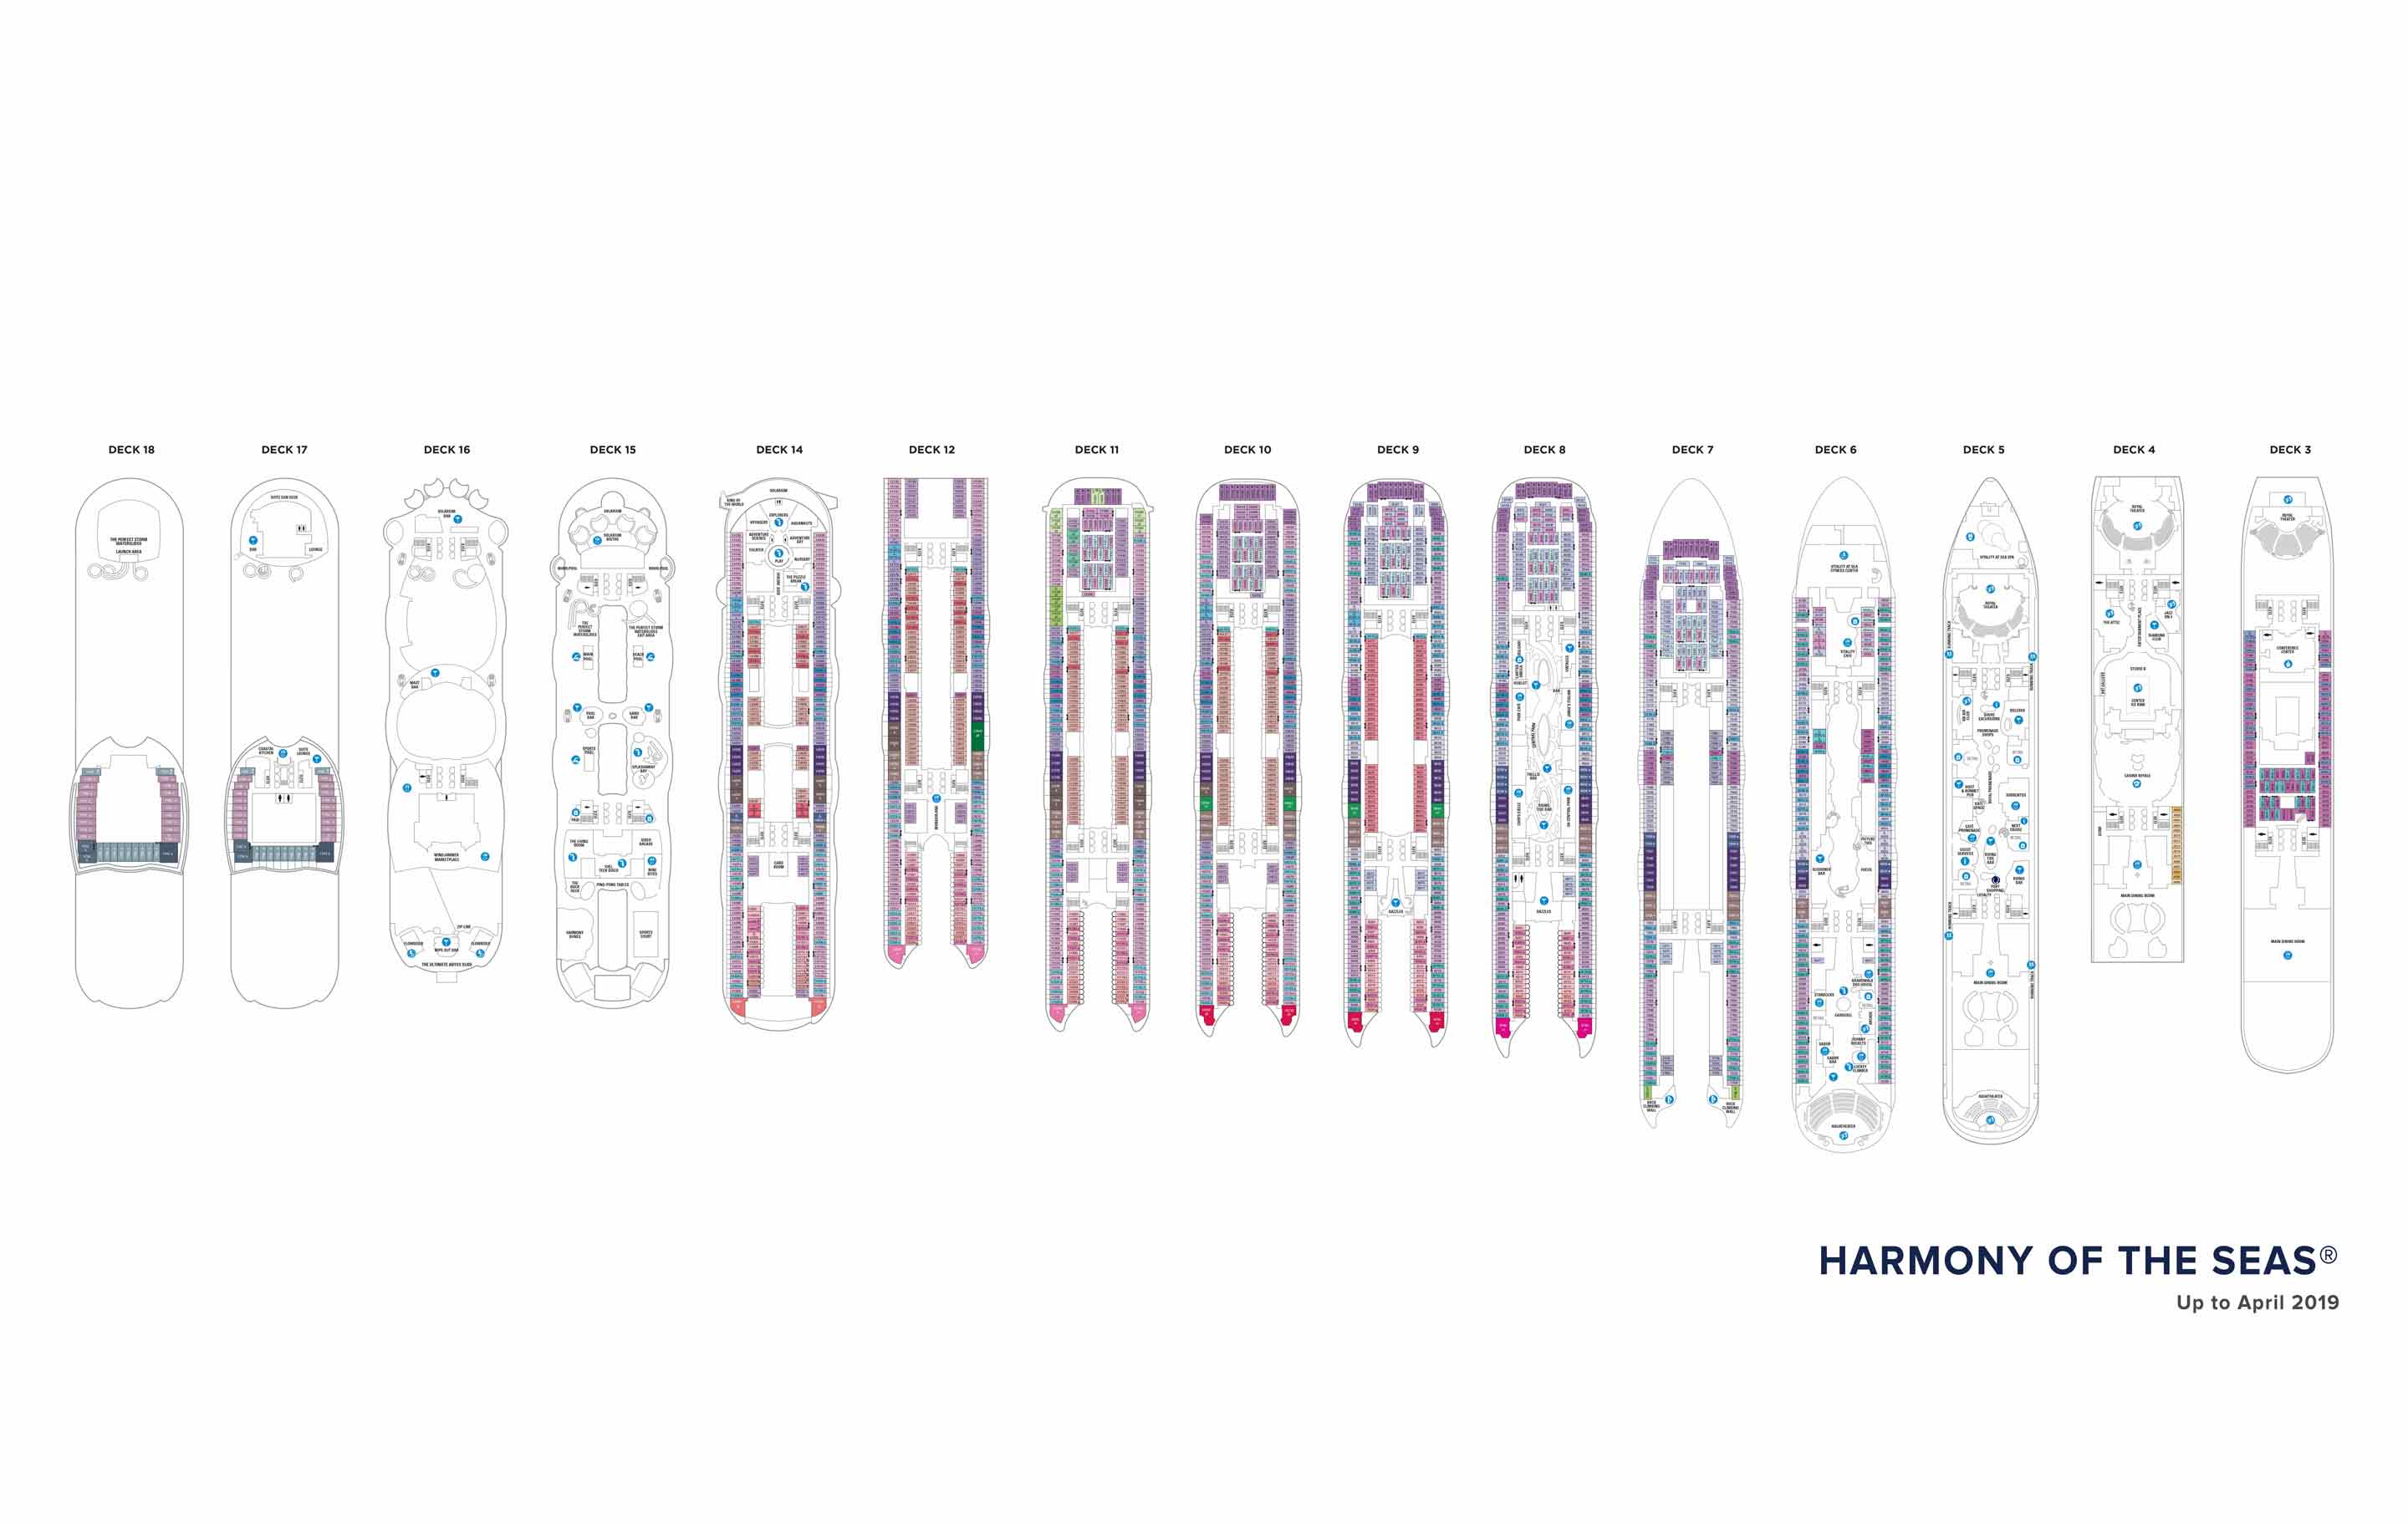 The deck plans for Harmony of the Seas, Royal Caribbean Cruises